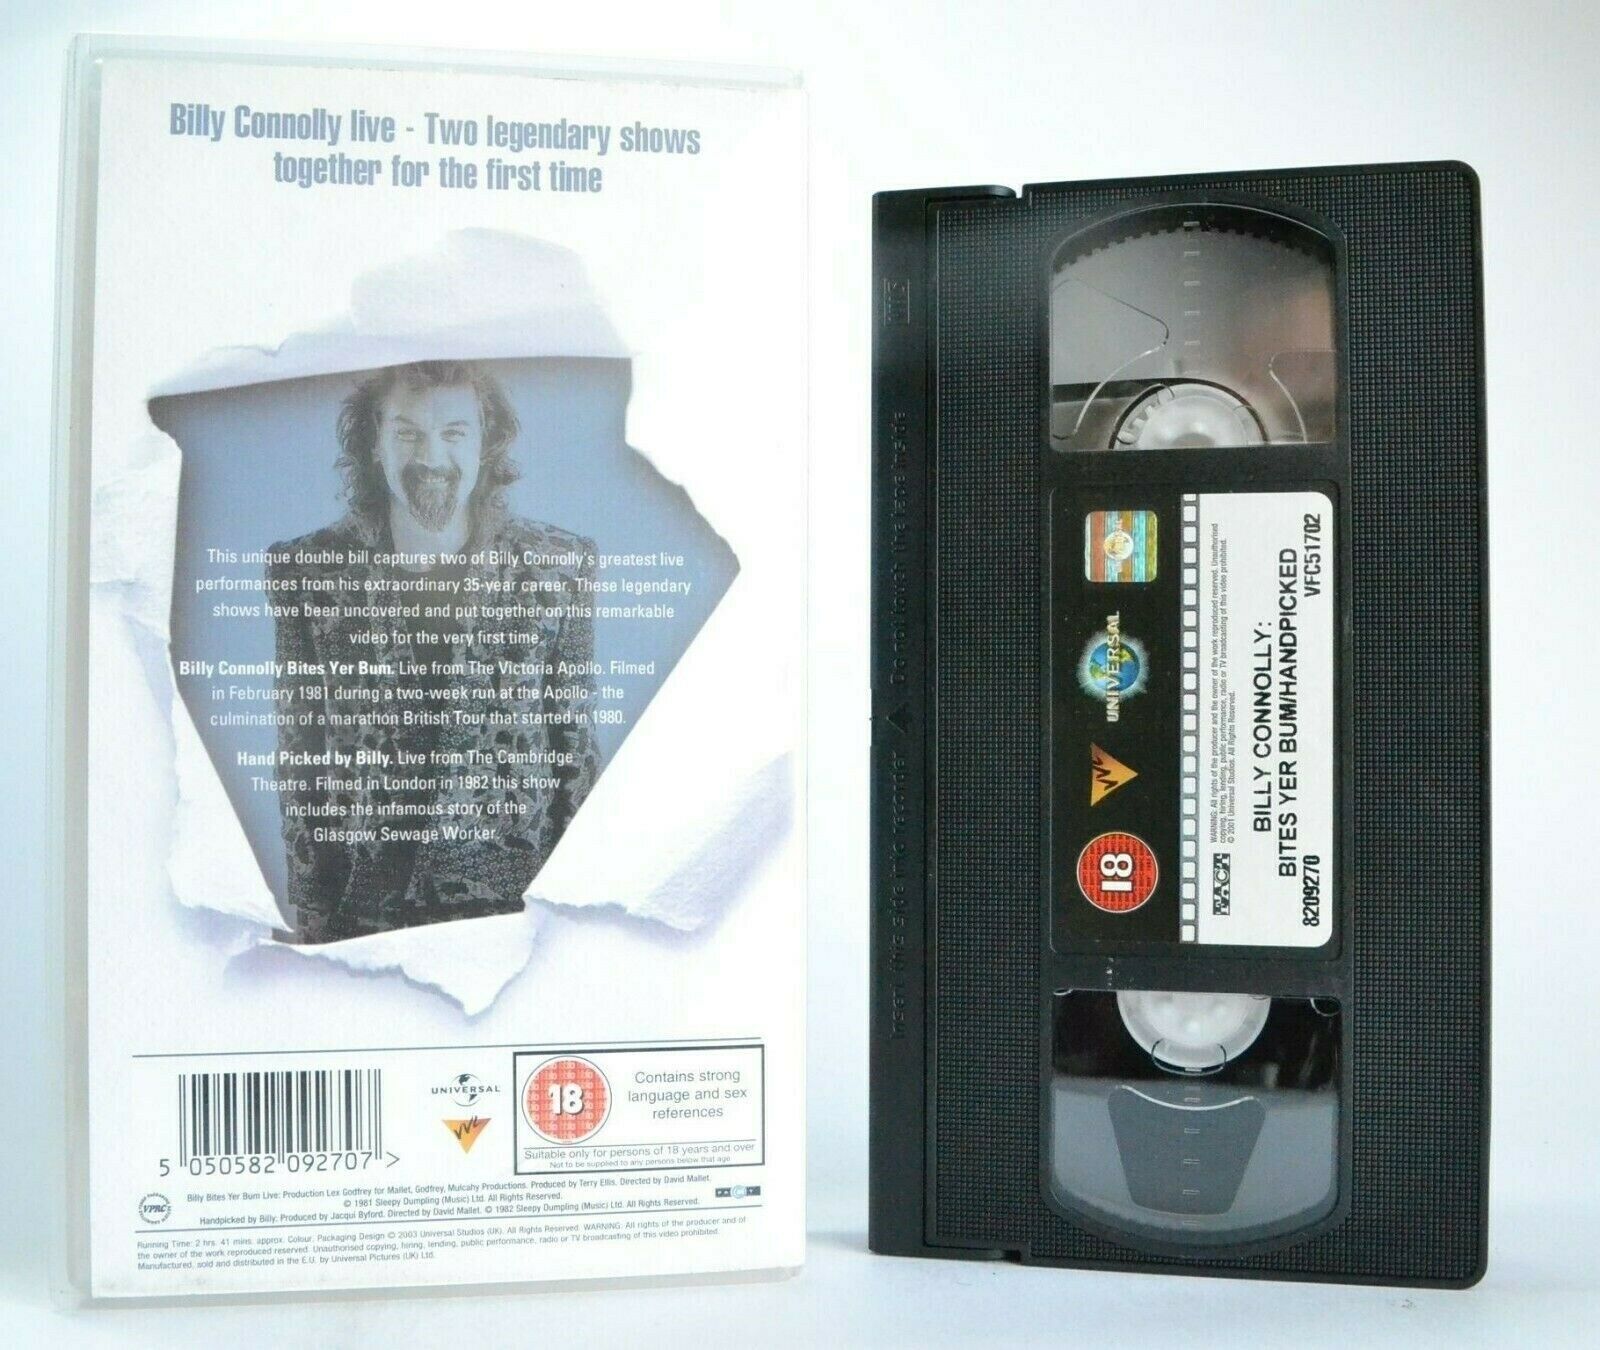 Billy Connolly: Bites Yer Bum (1980)/Handpicked (1981) - Live Comedy Shows - VHS-